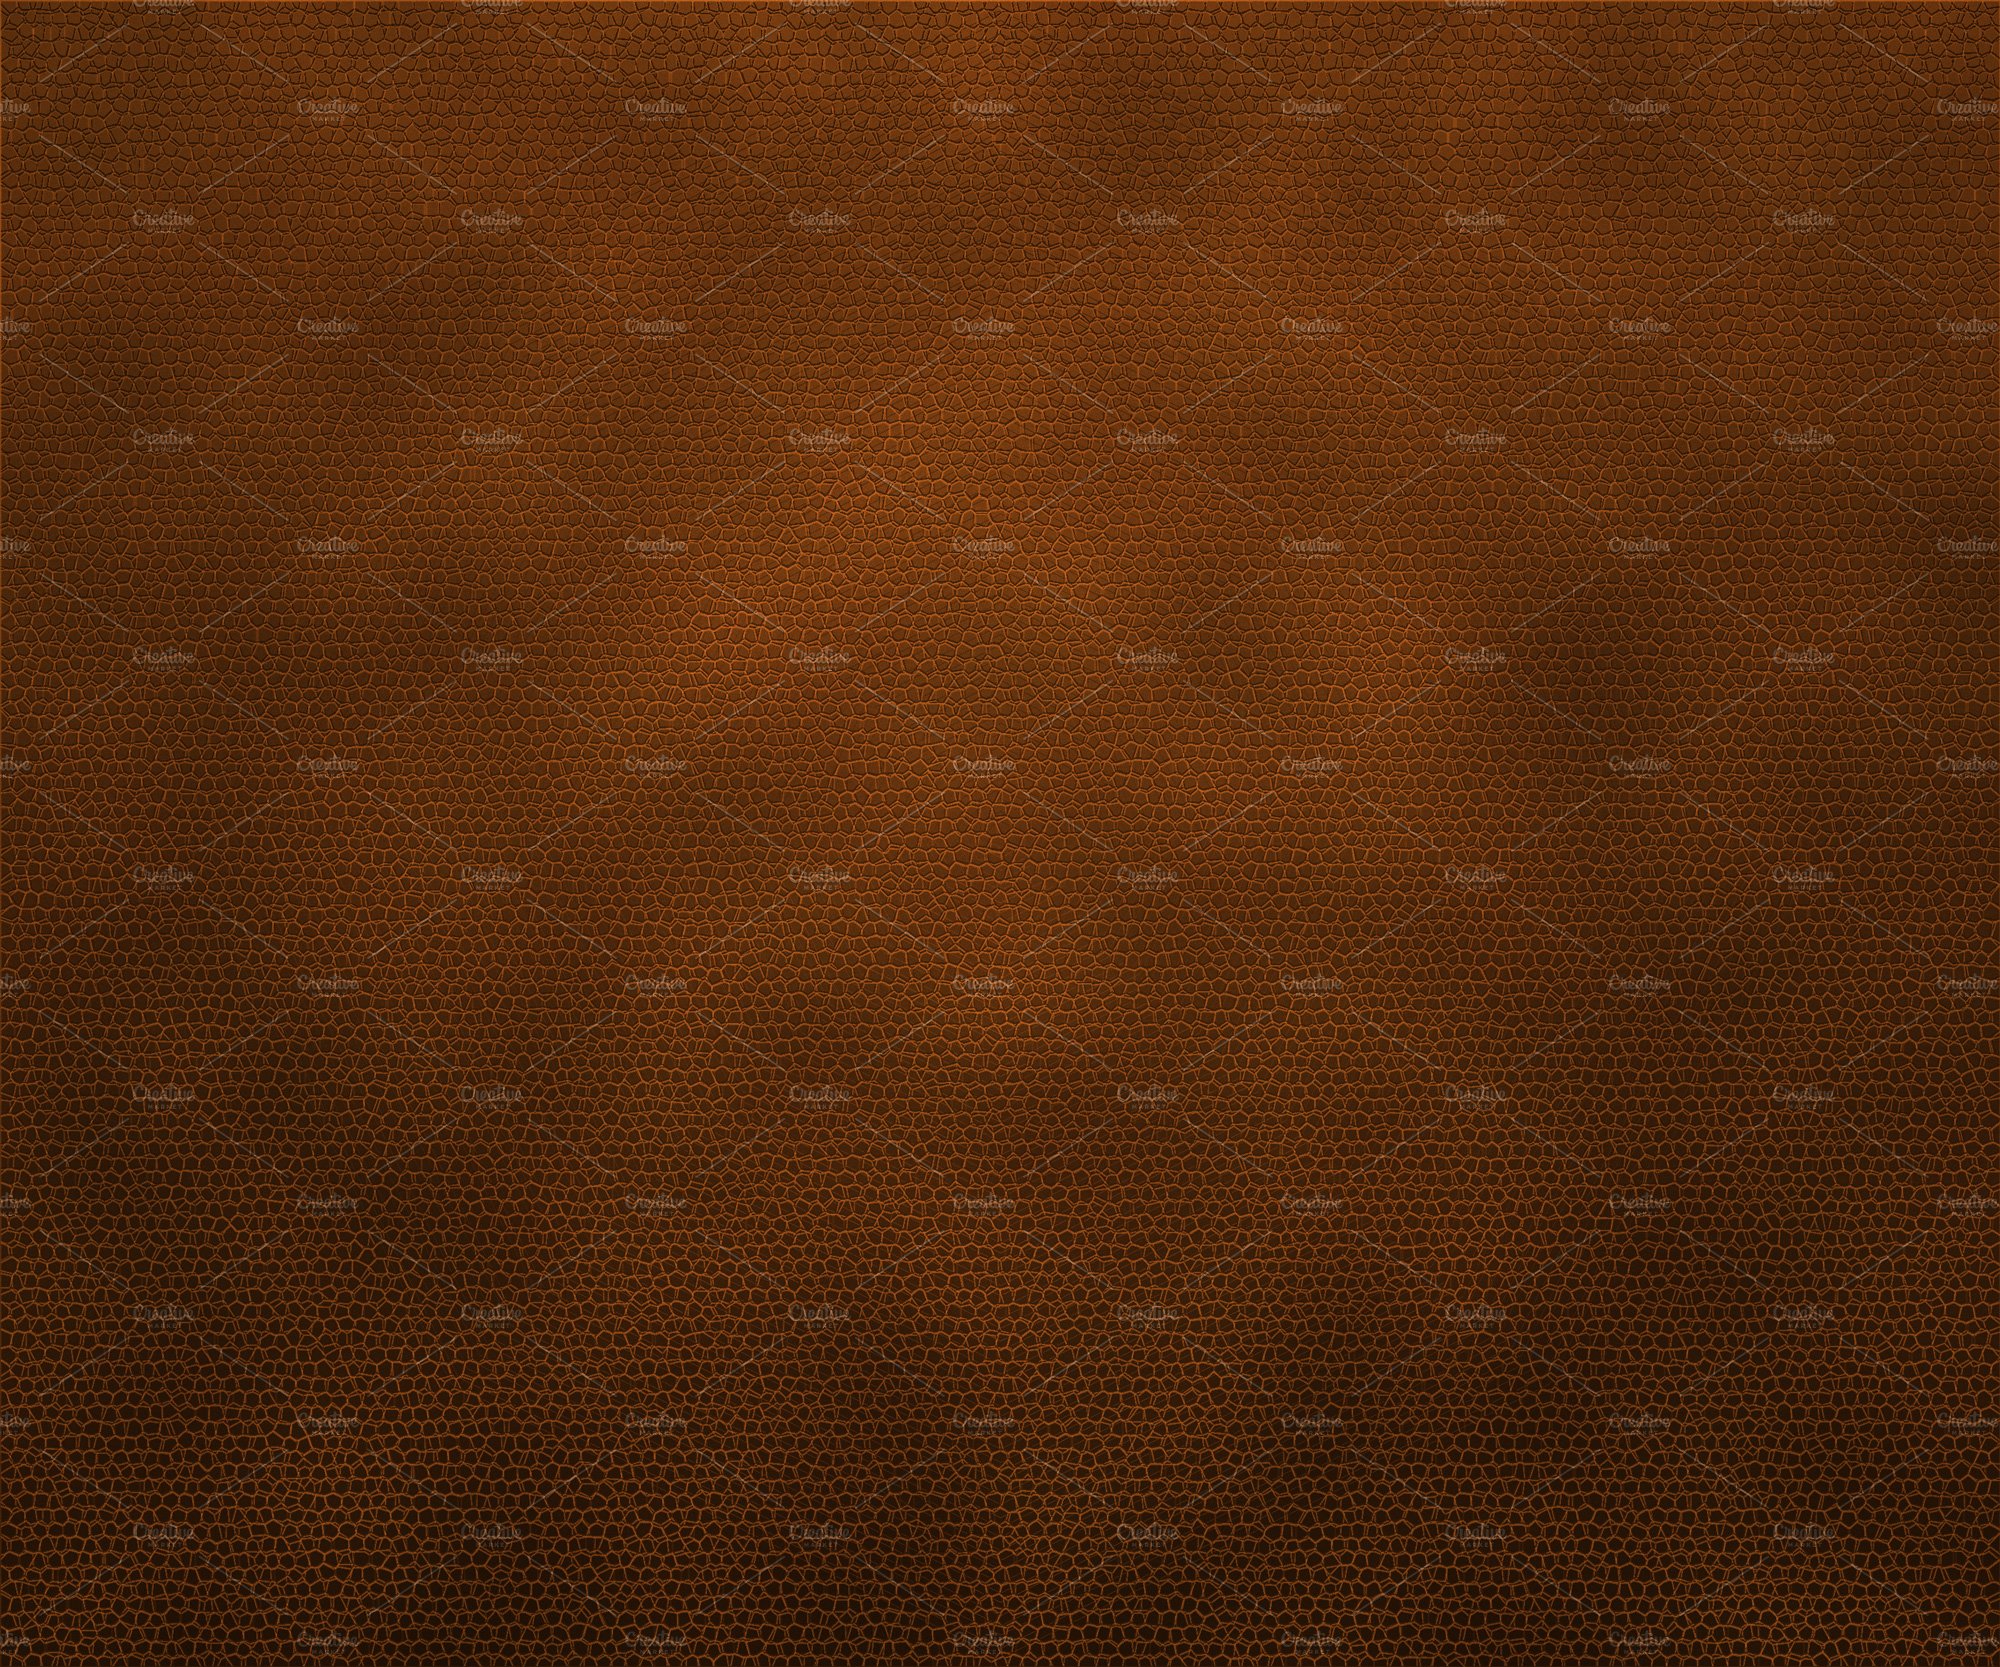 Leather Texture preview image.